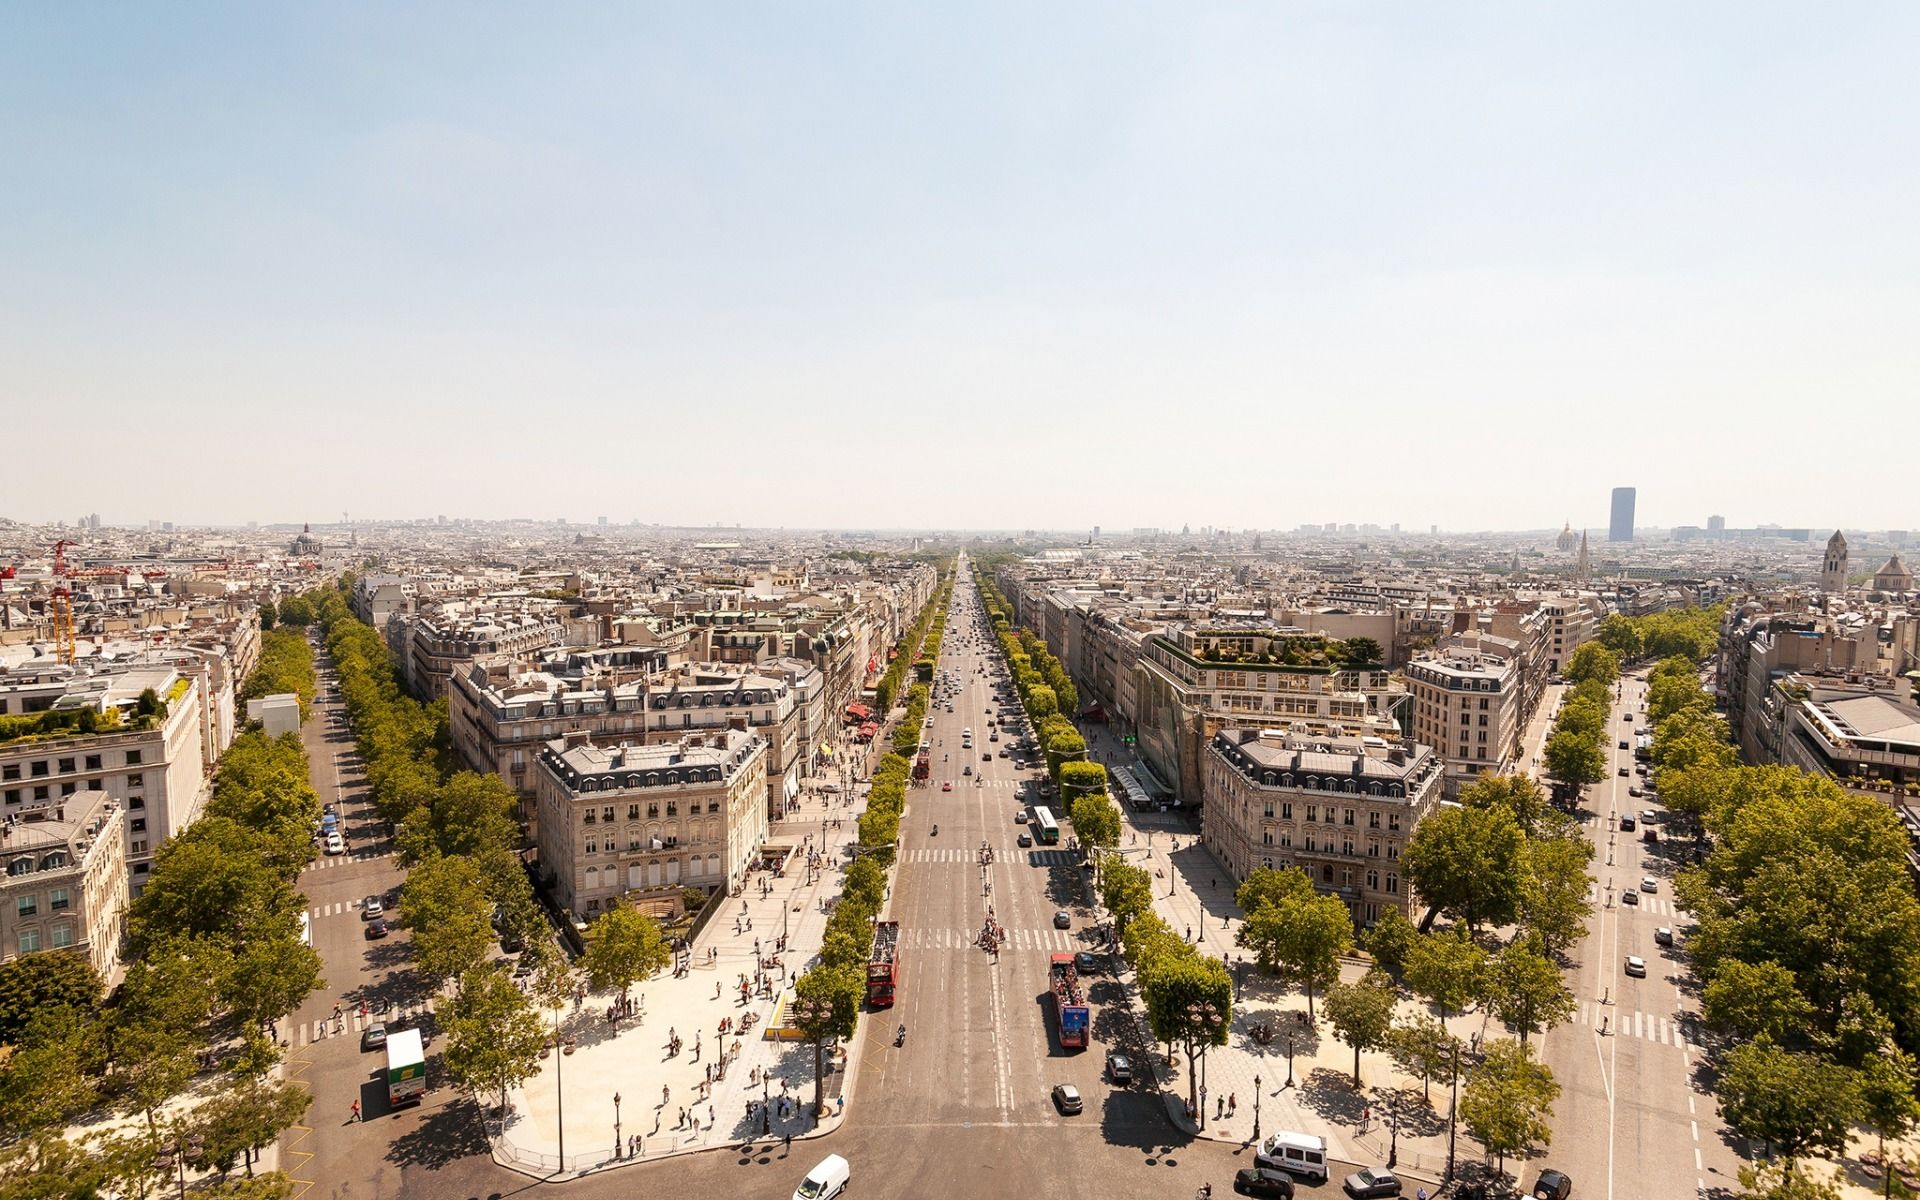 Download wallpaper Paris, France, tourism, streets, spring, cityscape, travel for desktop with resolution 1920x1200. High Quality HD picture wallpaper